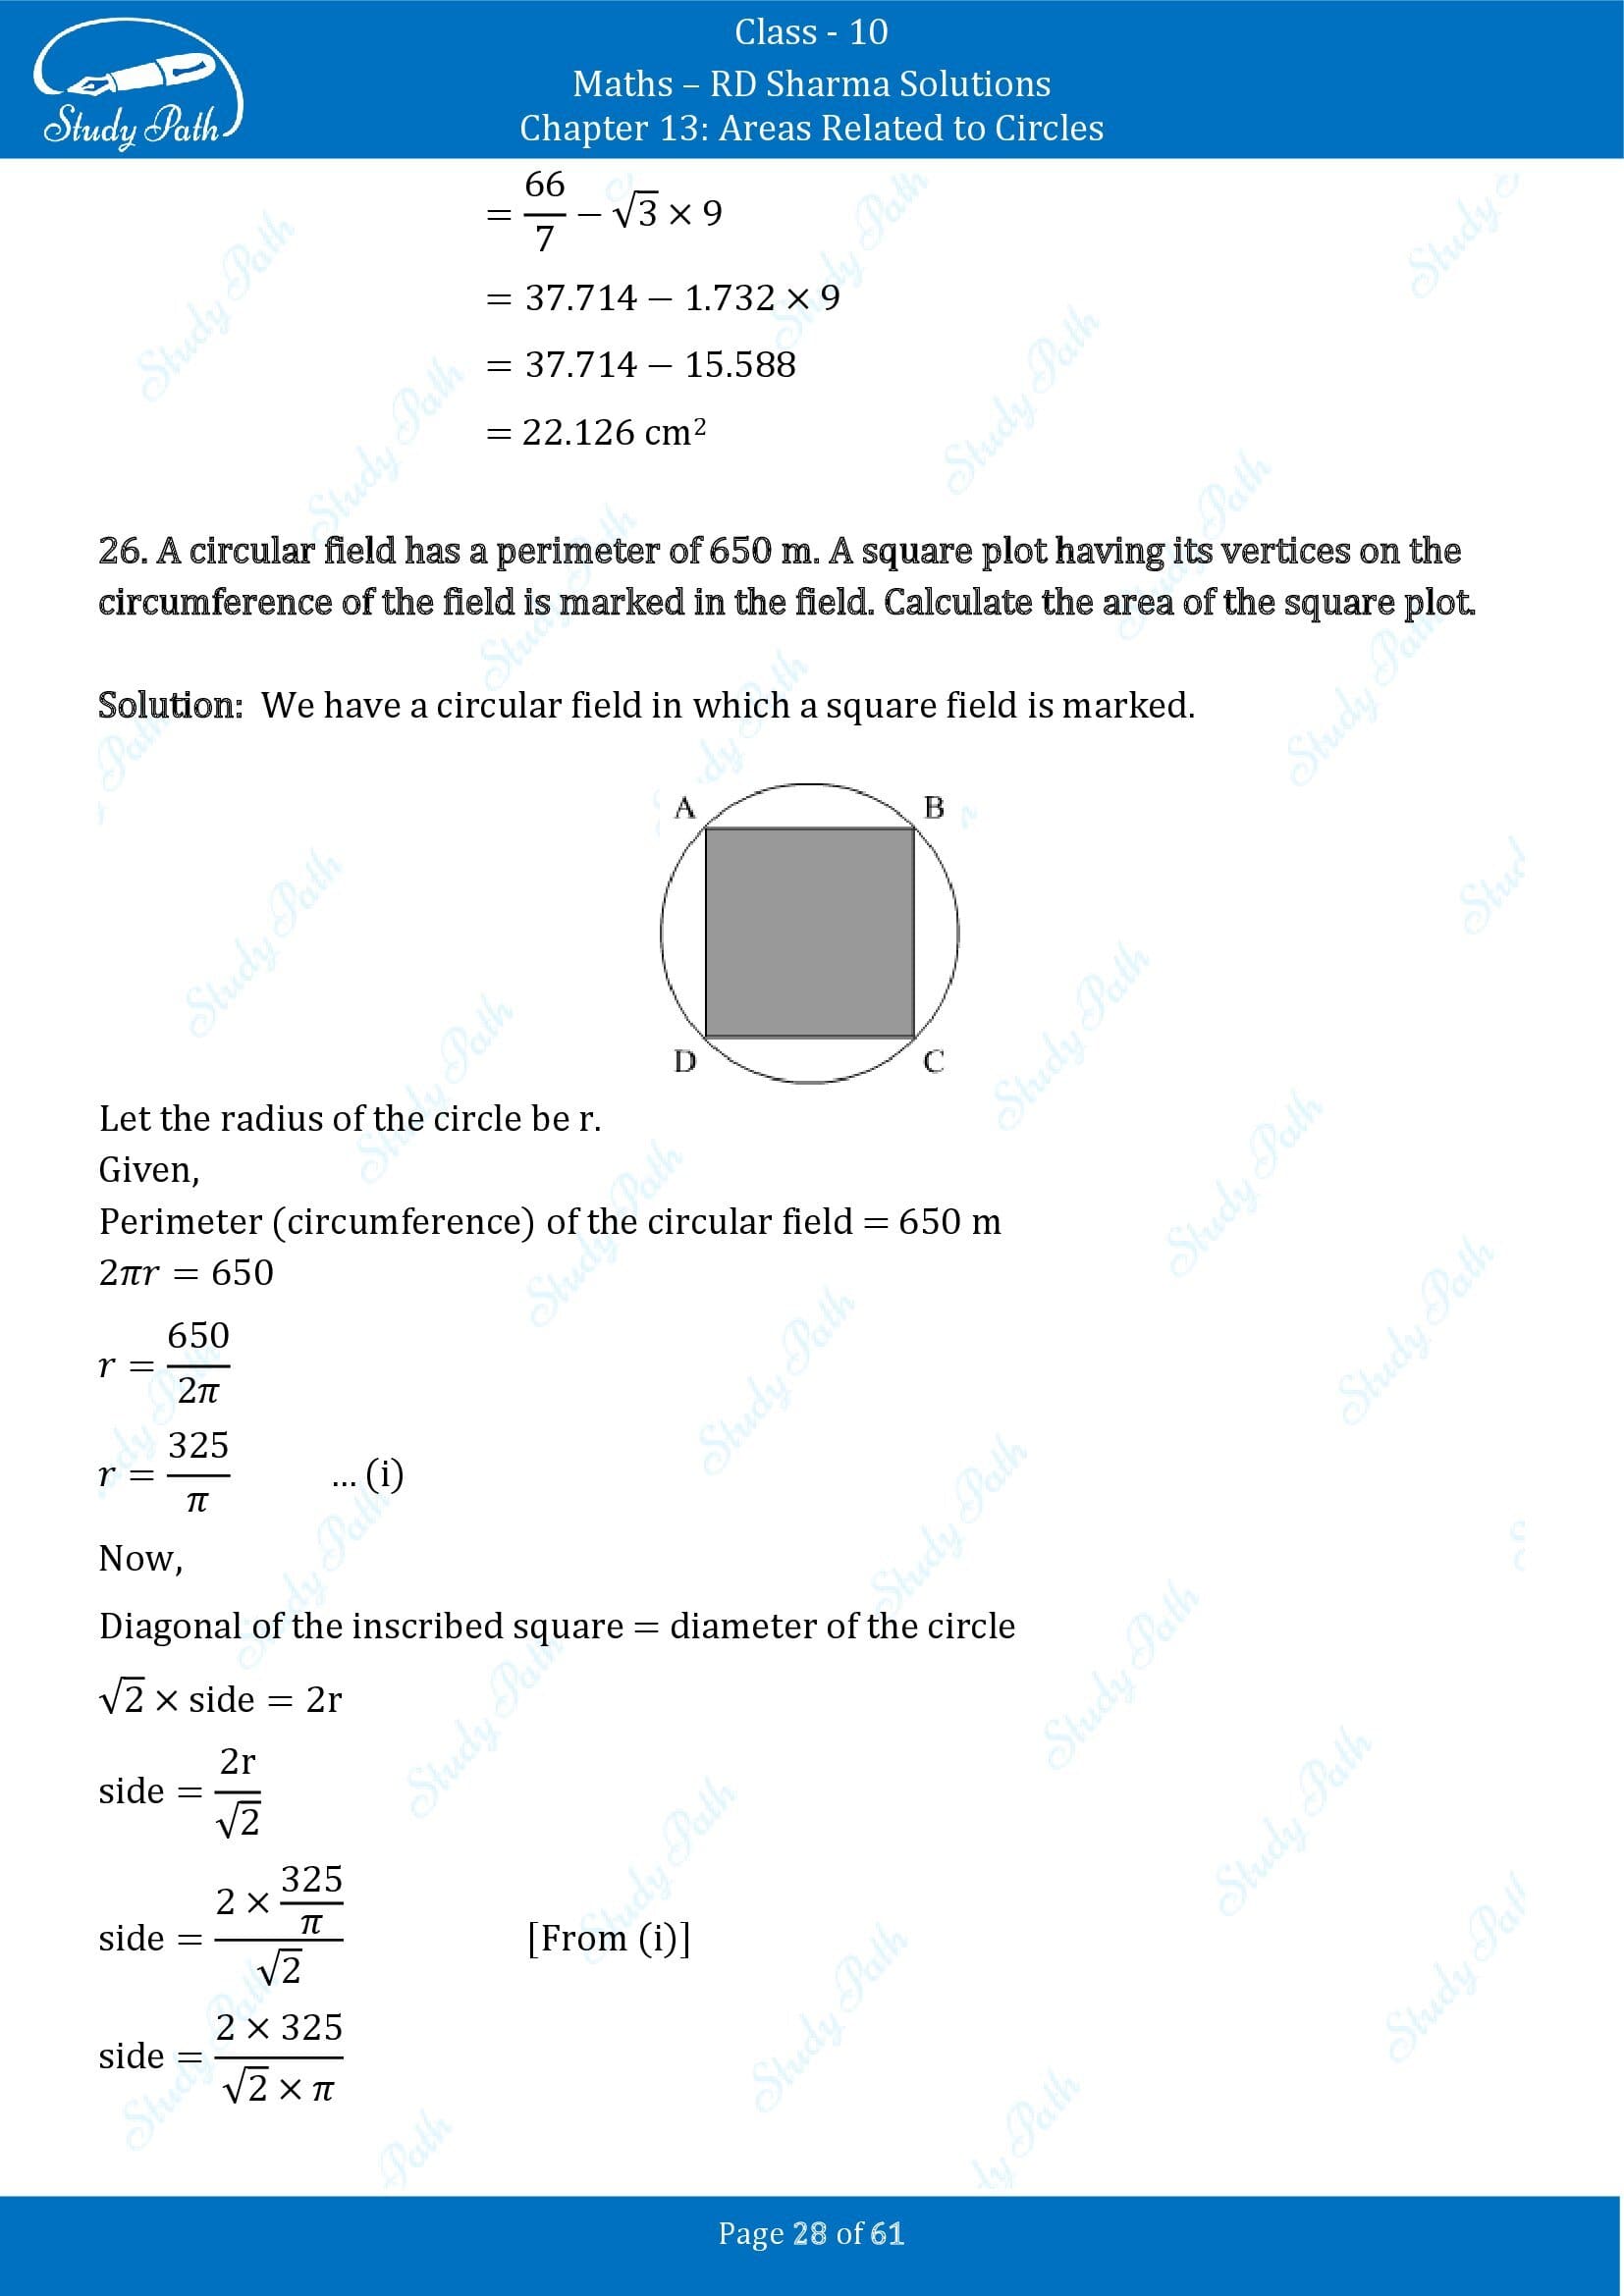 RD Sharma Solutions Class 10 Chapter 13 Areas Related to Circles Exercise 13.4 00028